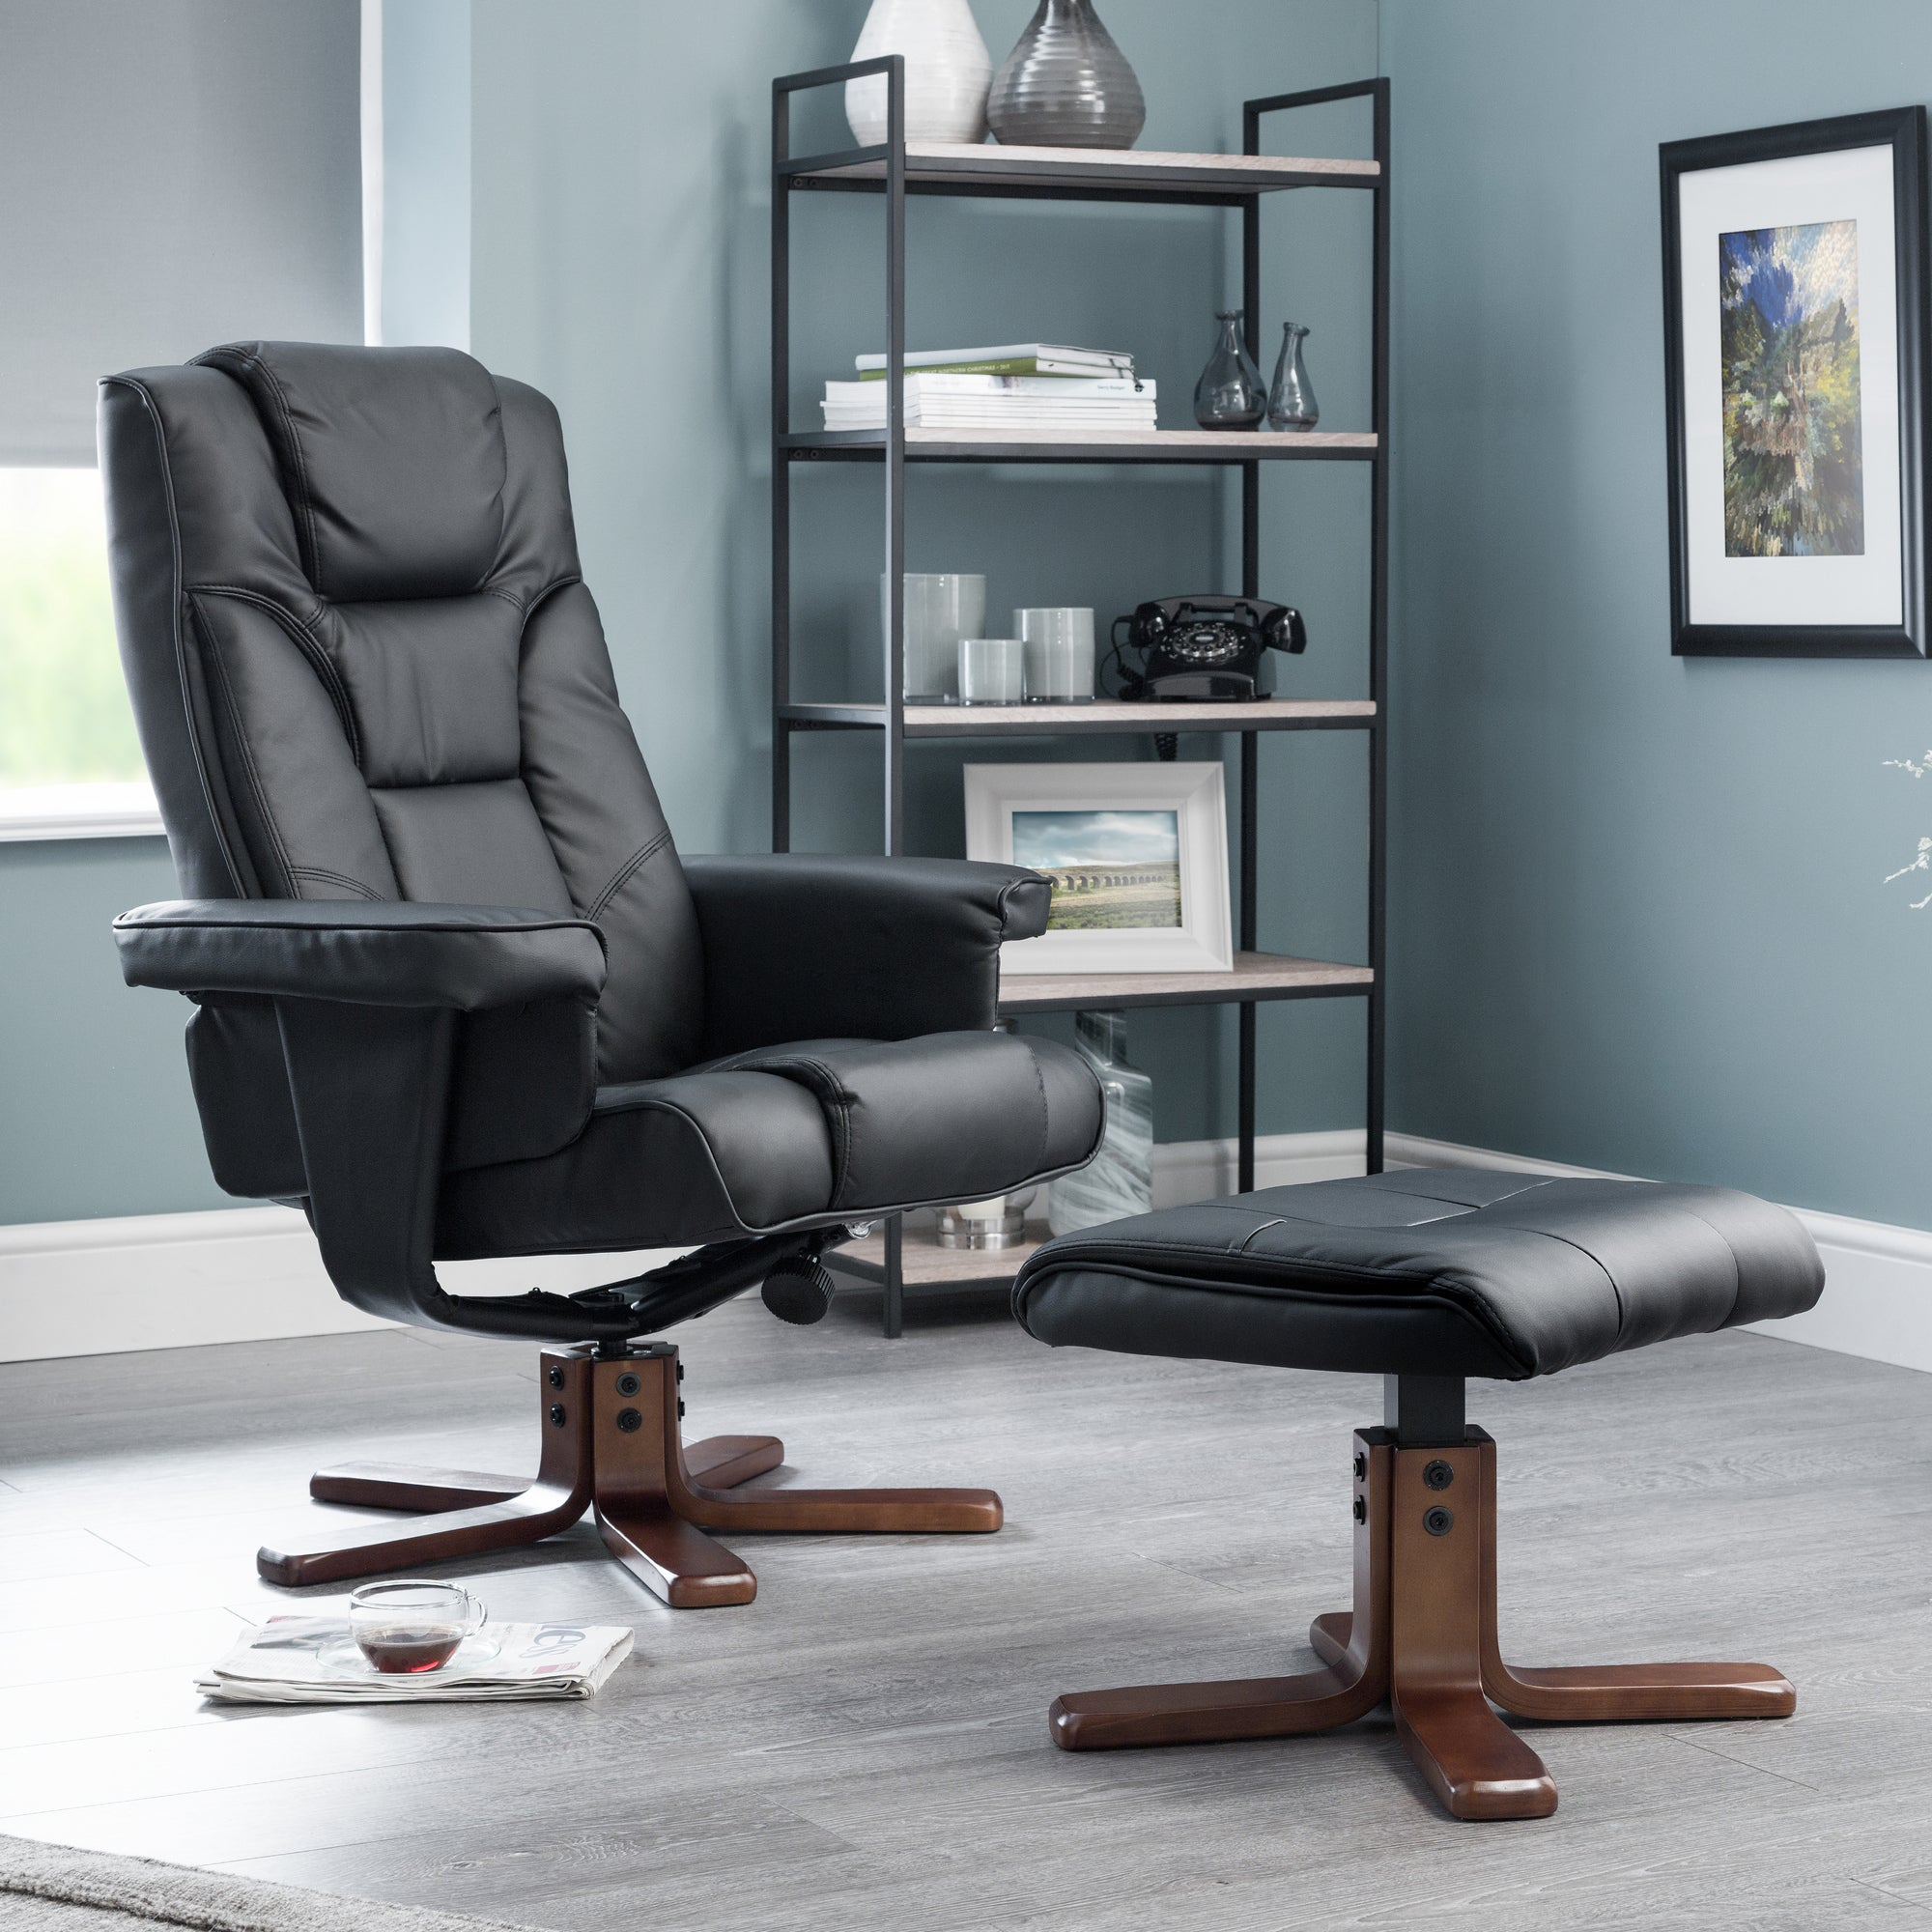 Malmo Faux Leather Swivel Recliner and Stool